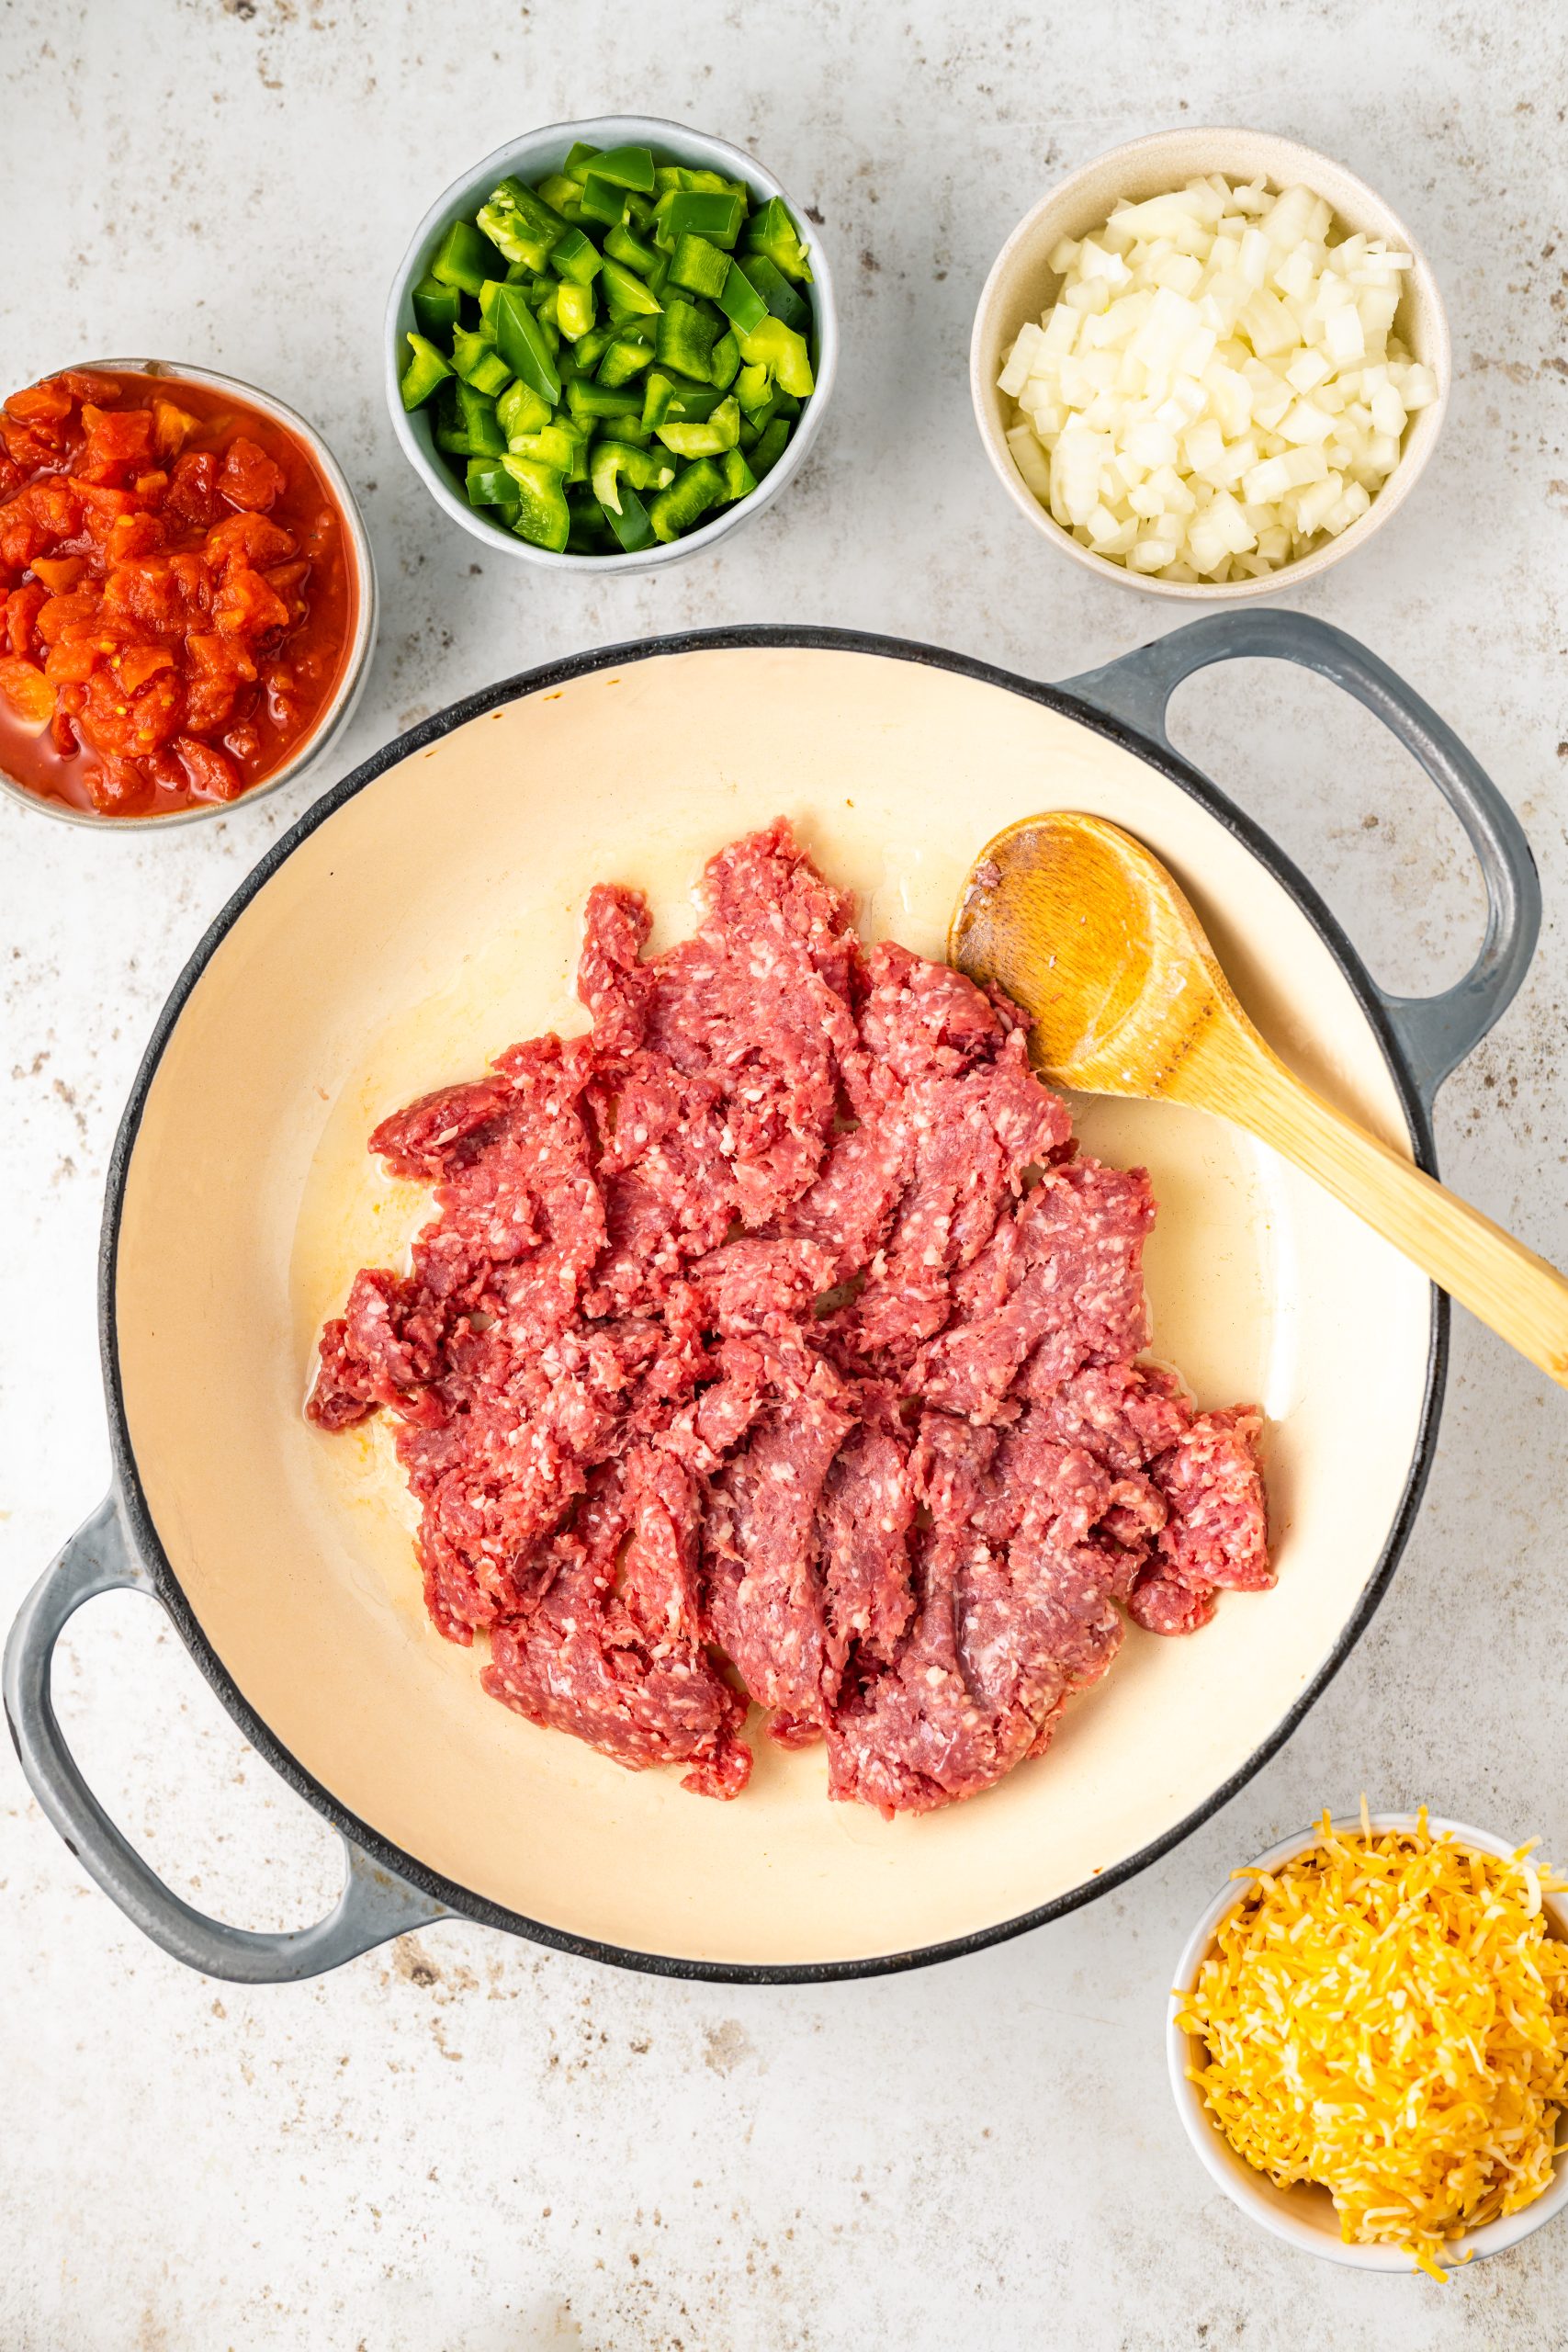 A skillet filled with ground beef, onions, peppers, Cheddar cheese  and other ingredients.